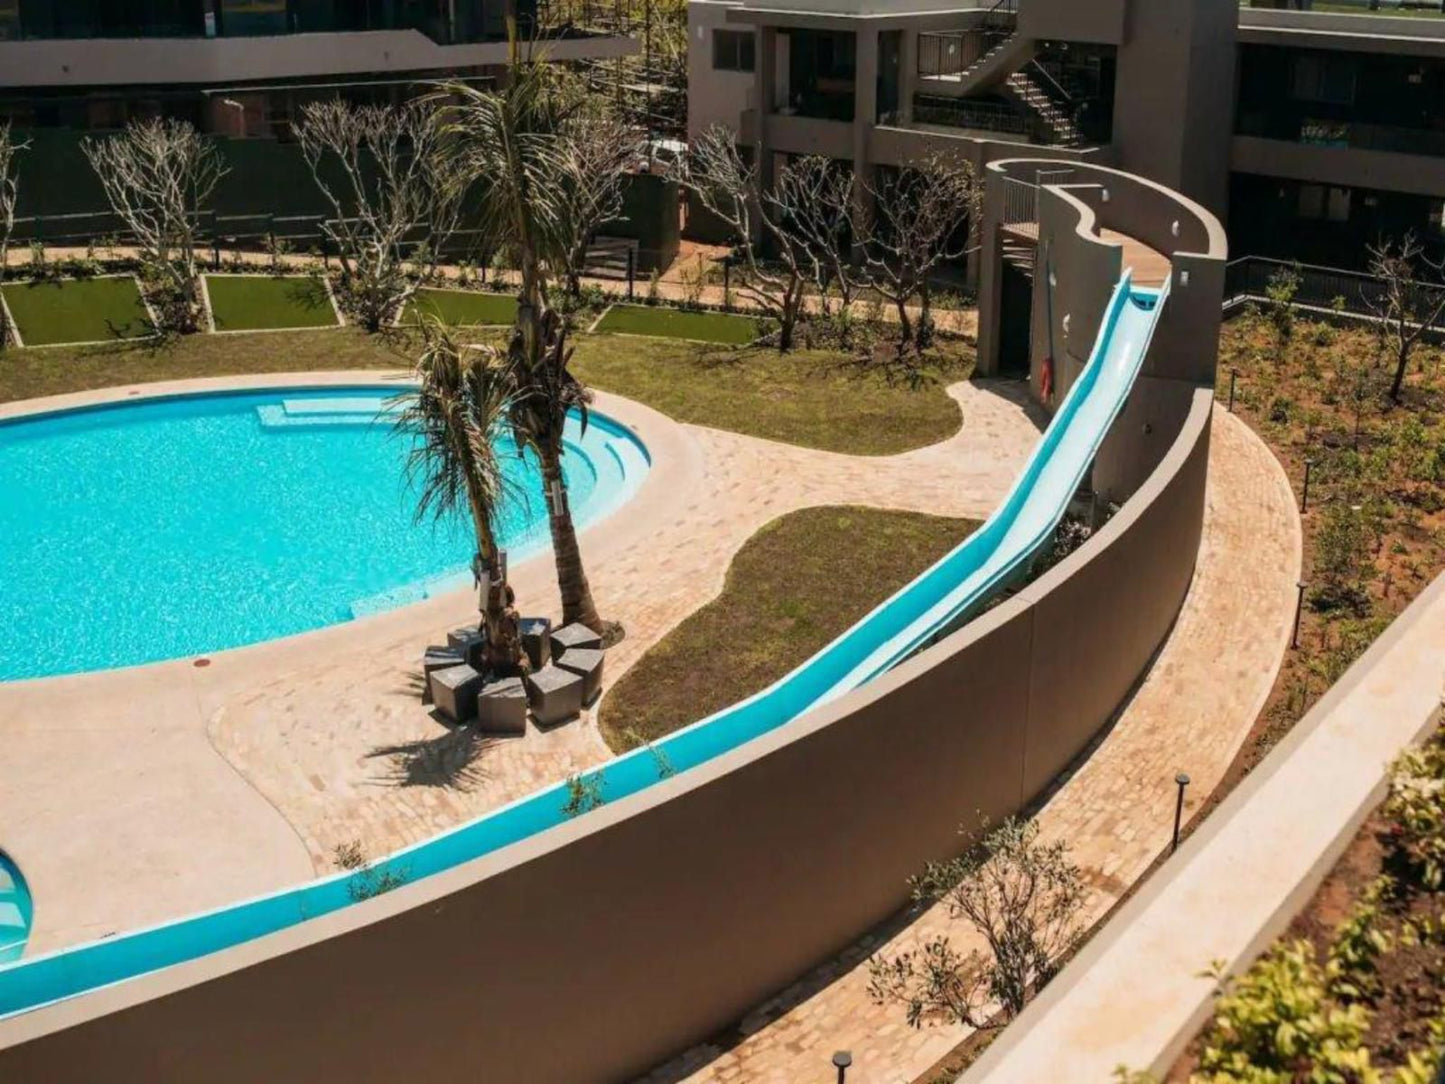 Luxury Apartment Near The Airport With Sea View Hillhead Umhlanga Kwazulu Natal South Africa Palm Tree, Plant, Nature, Wood, Swimming Pool